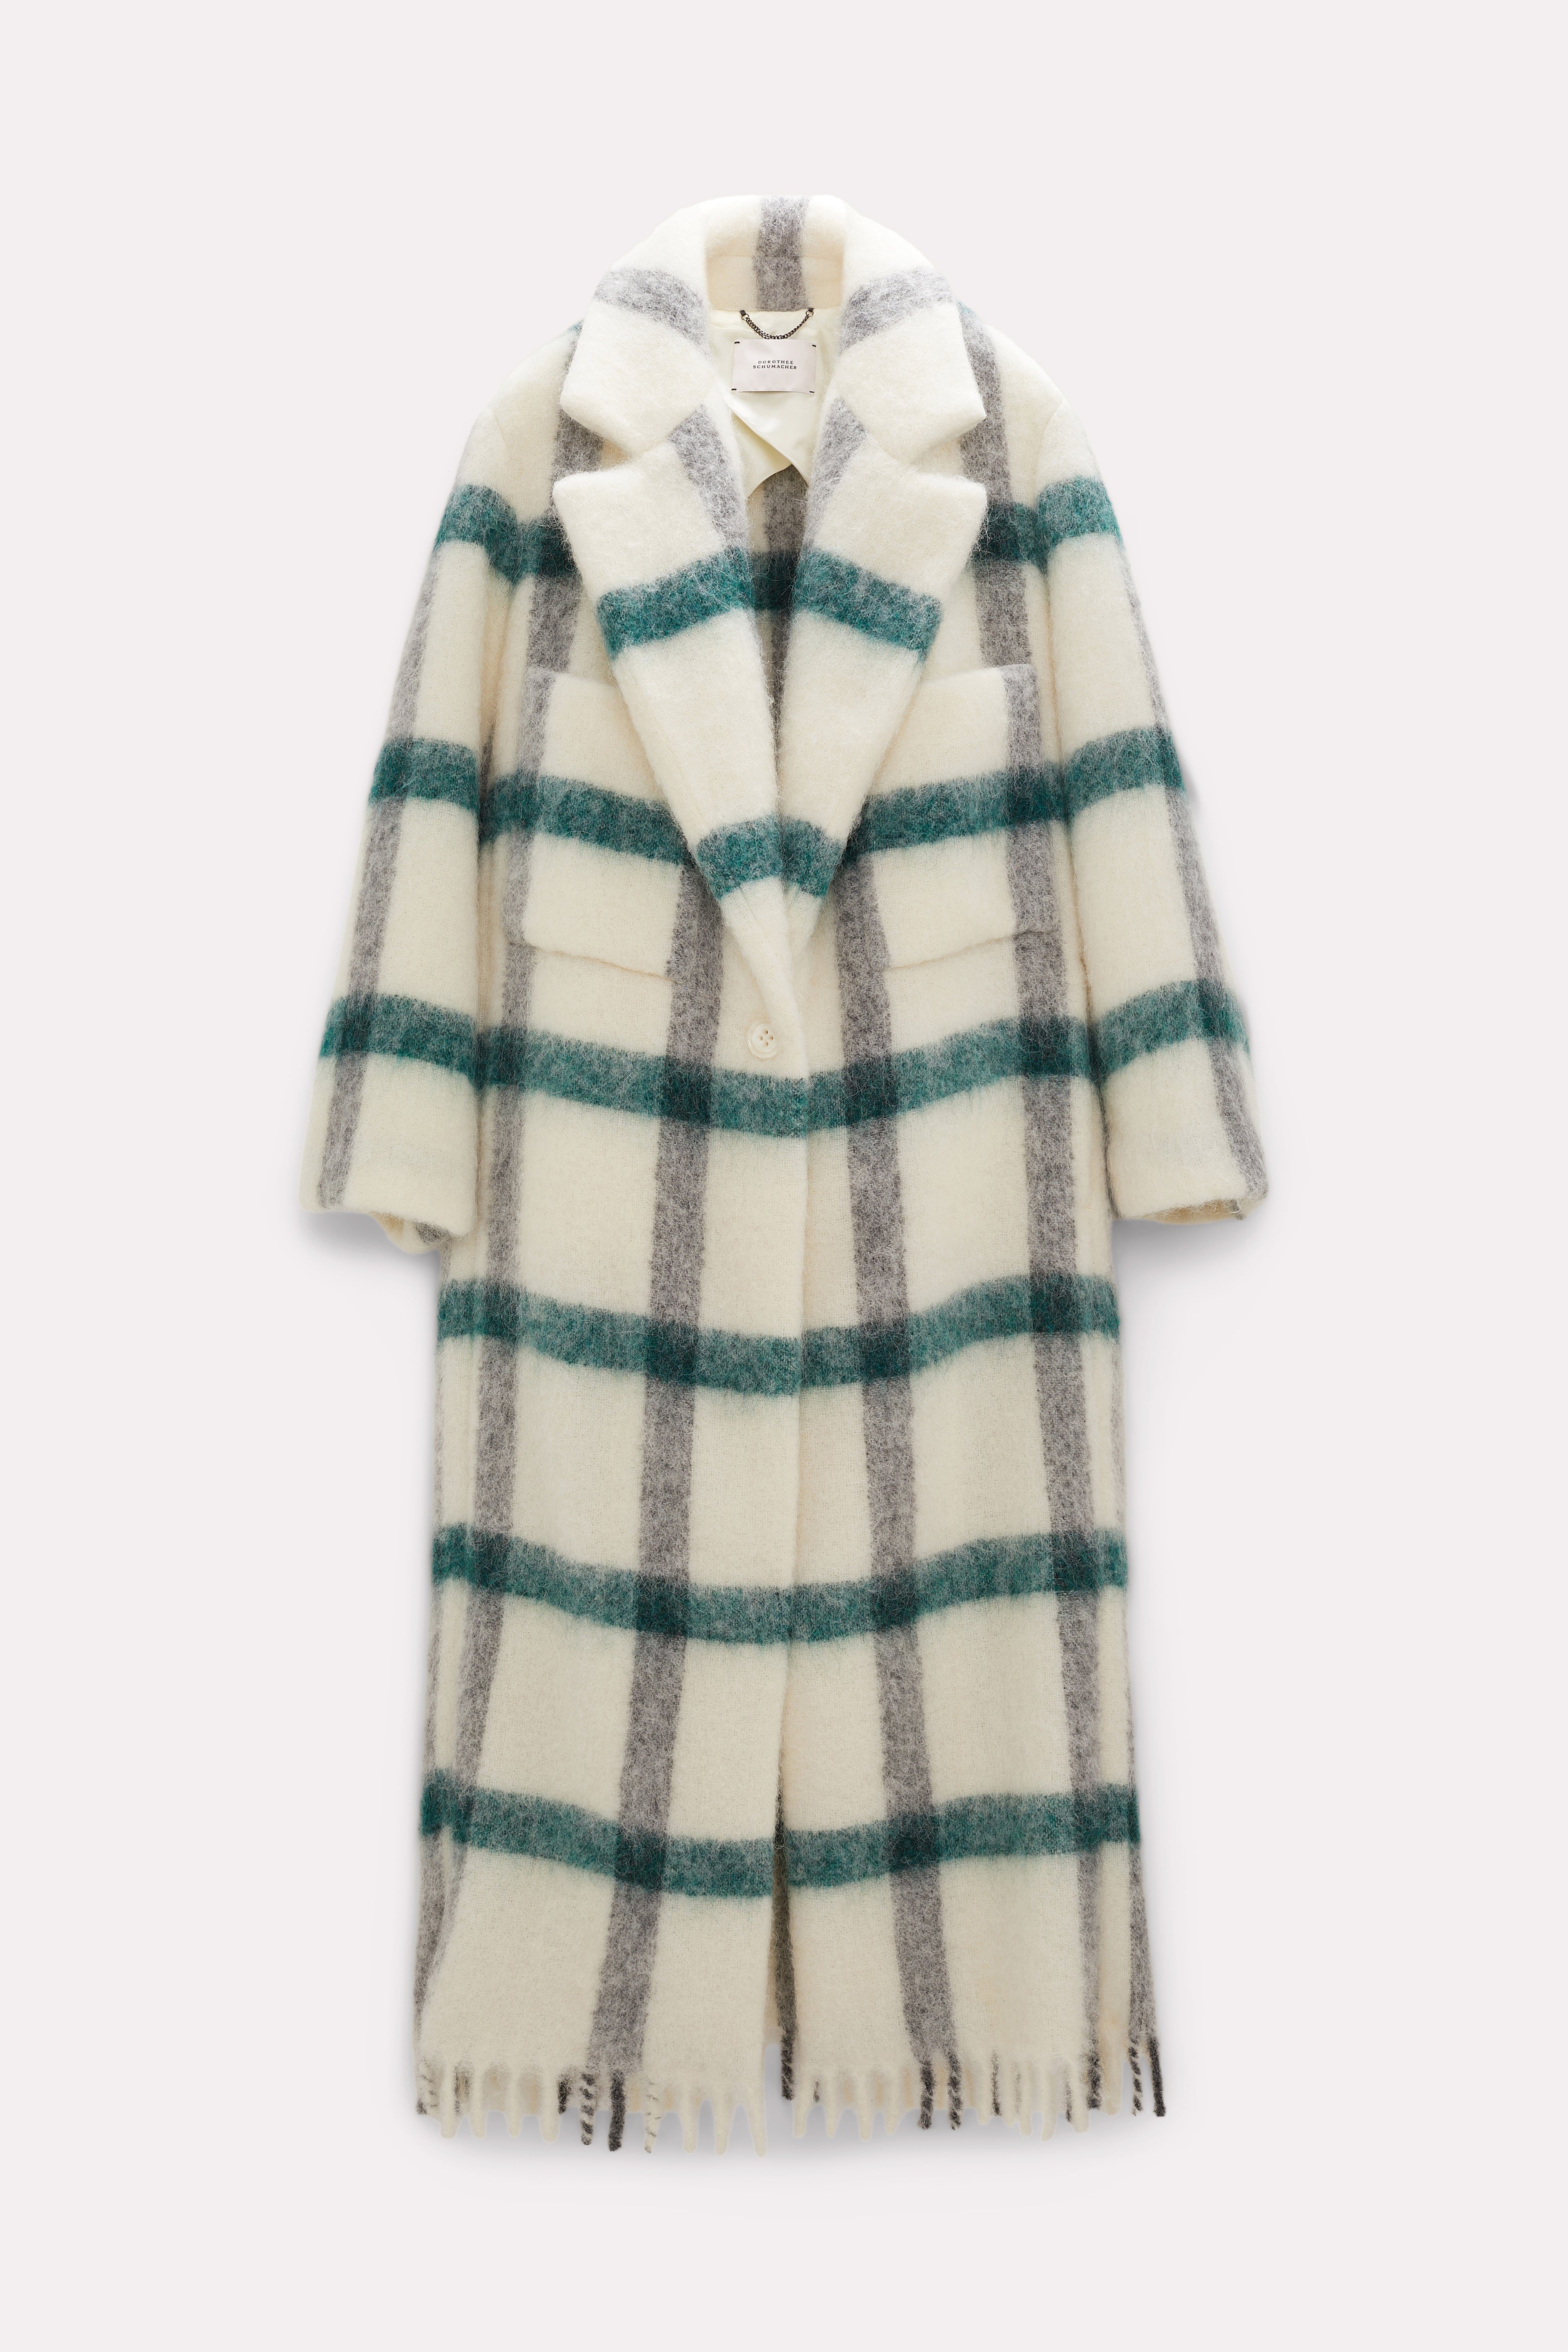 Dorothee-Schumacher-OUTLET-SALE-CHECKED-SOFTNESS-coat-Jacken-Mantel-ARCHIVE-COLLECTION.jpg